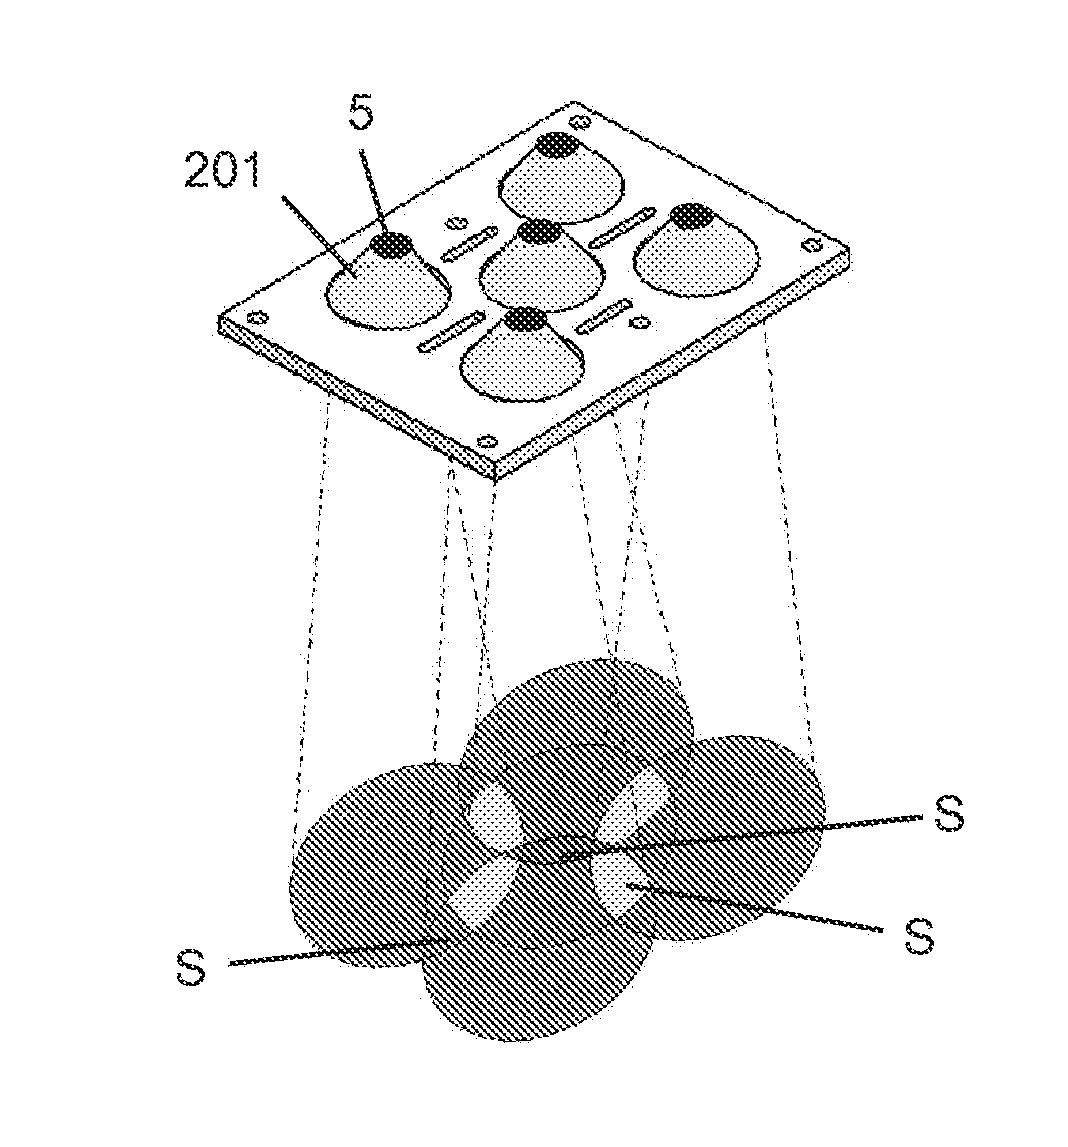 Phototherapy treatment device